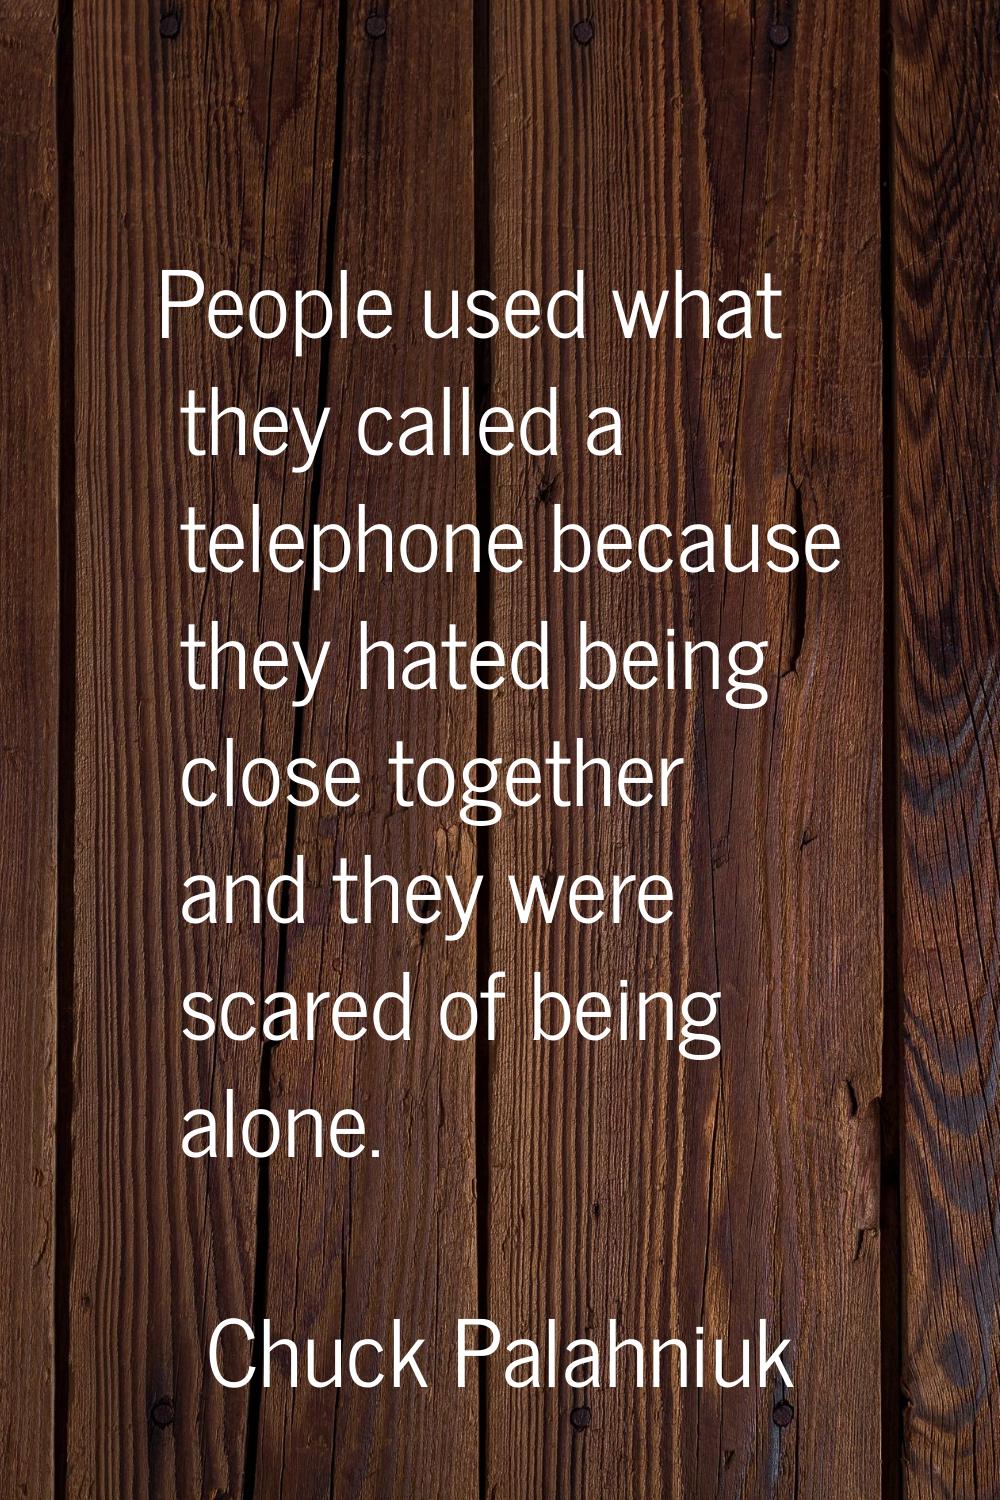 People used what they called a telephone because they hated being close together and they were scar